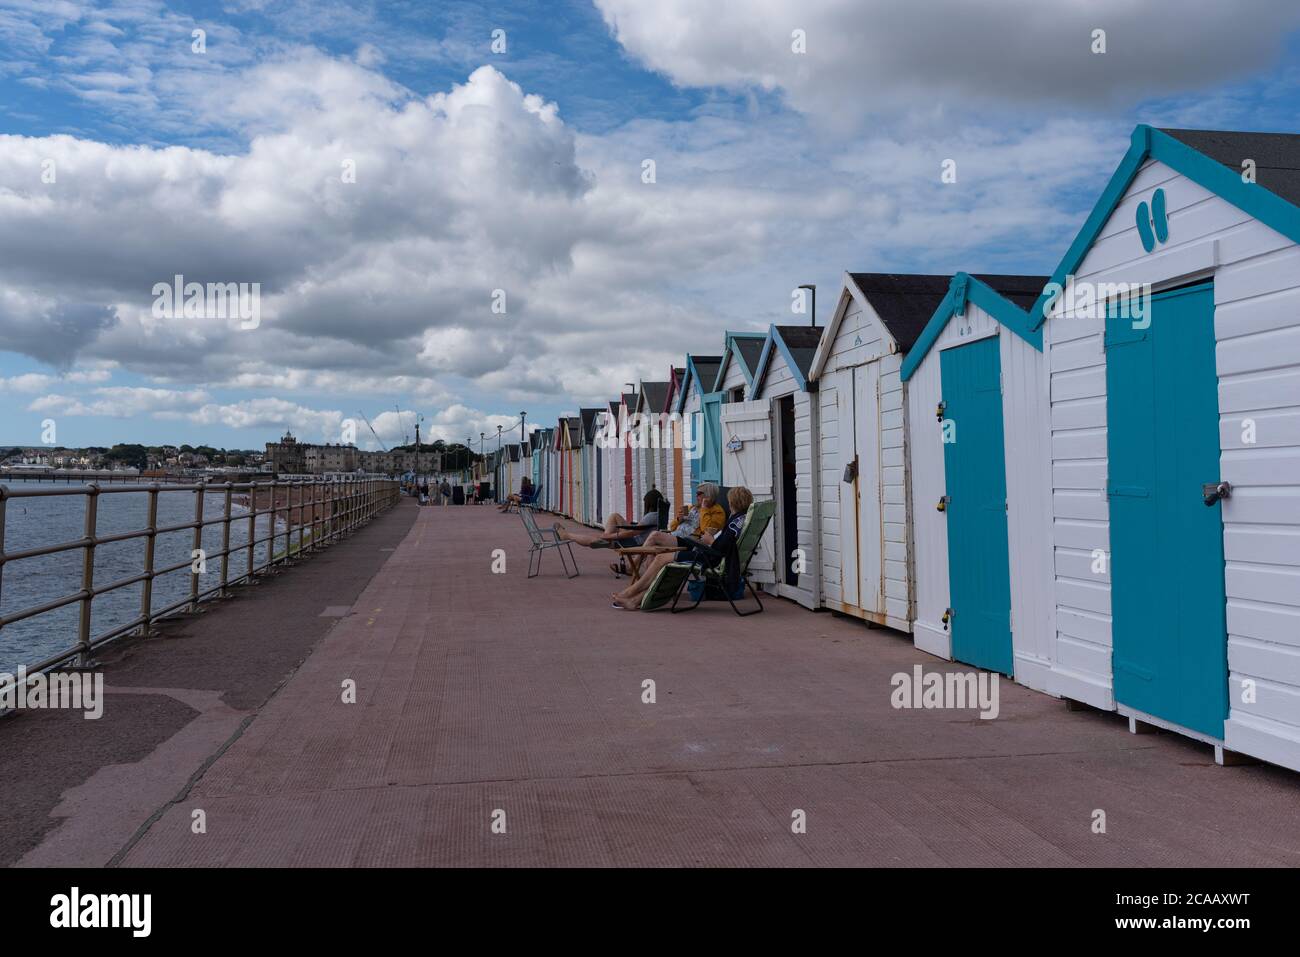 People sitting by Beach huts at Paignton enjoying the sun between the clouds on a typical British summer weather Stock Photo